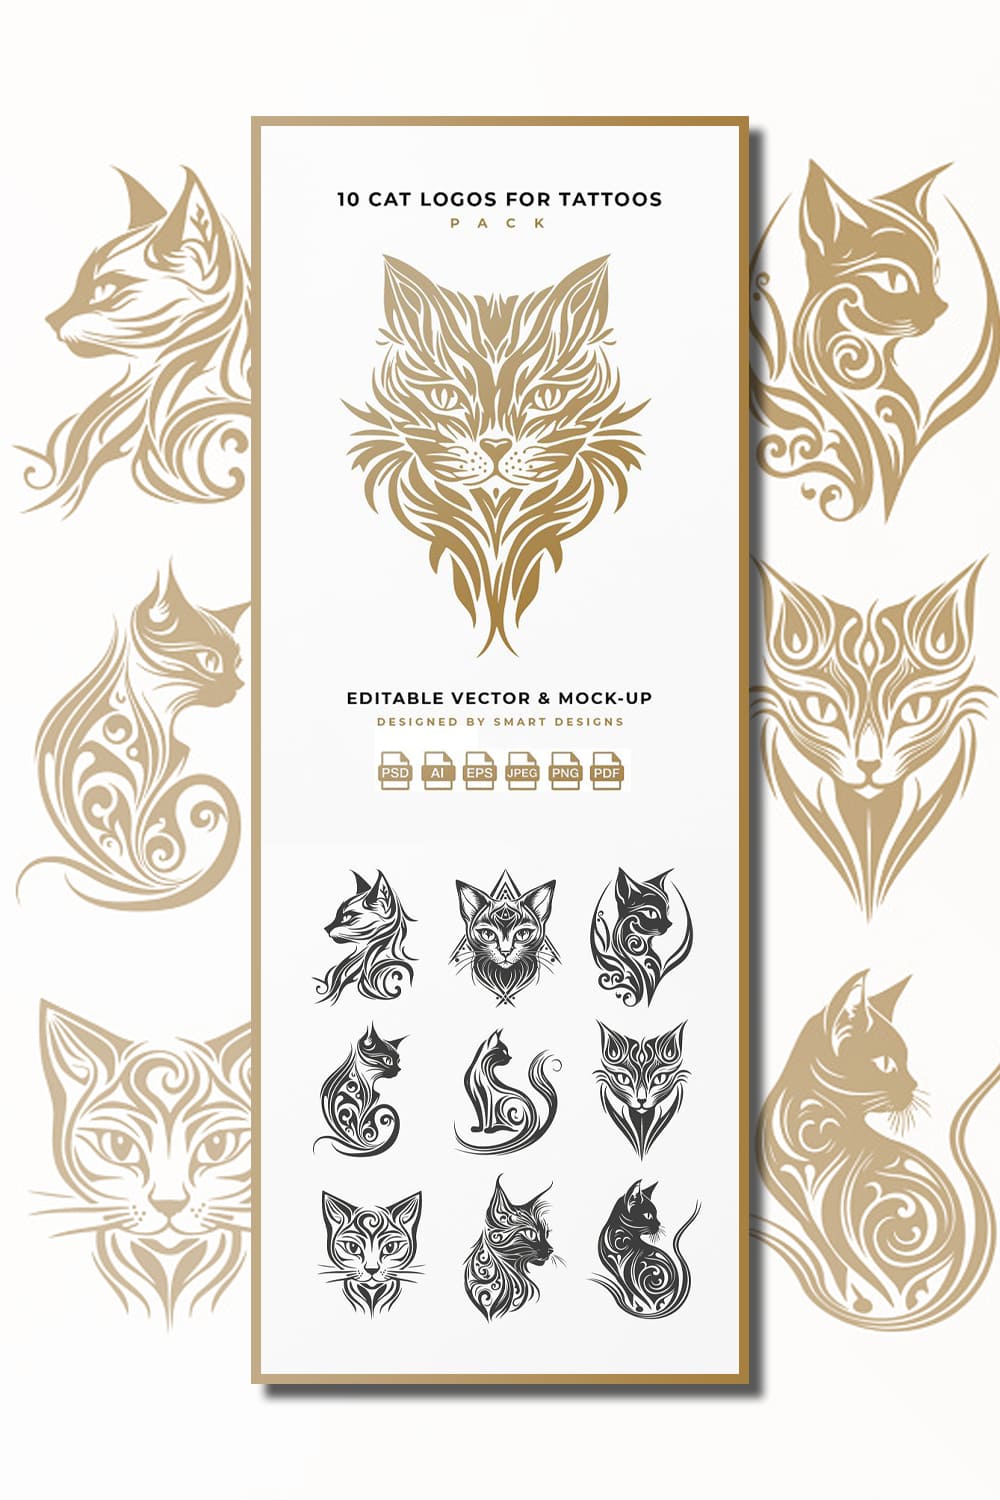 10 cat logos for tattoos pack editable vector and mock-up.